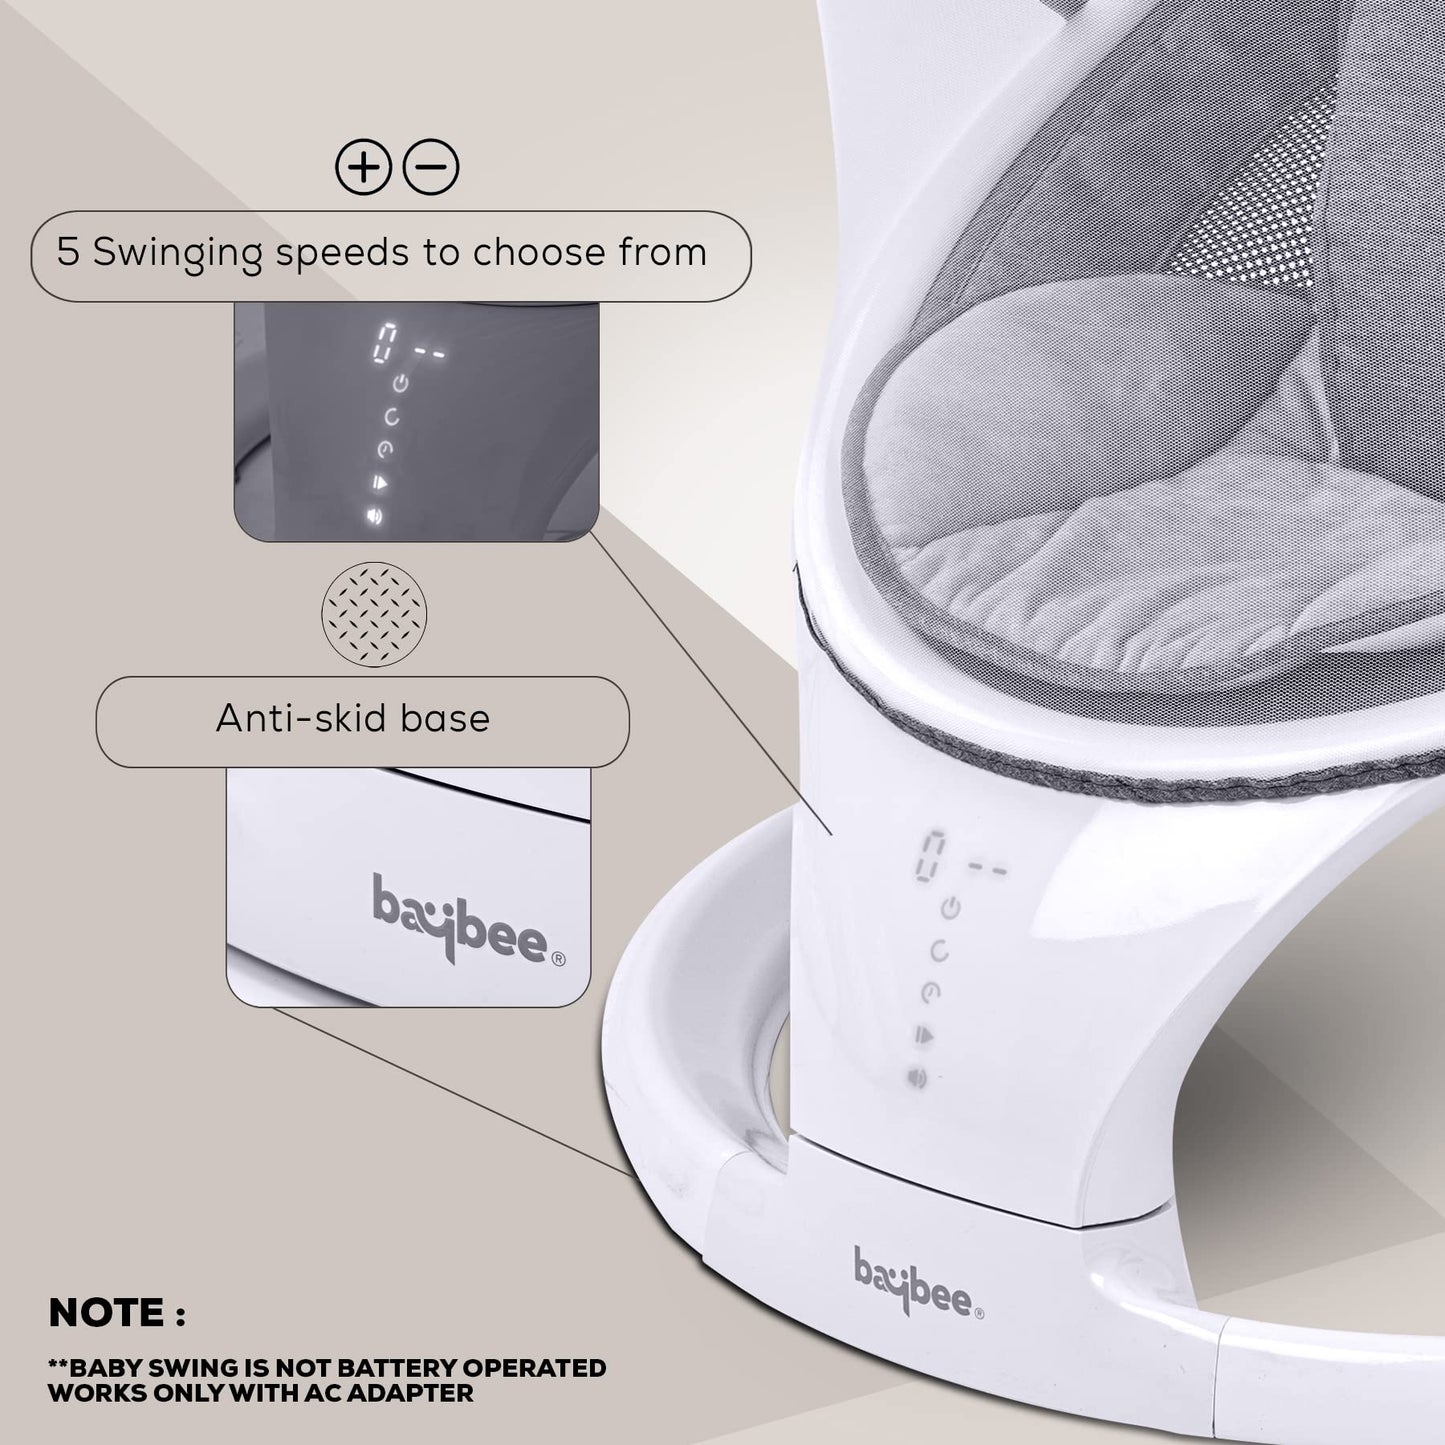 Baybee Automatic Electric Baby Swing Cradle, Adjustable Swing Speed with Mosquito Net